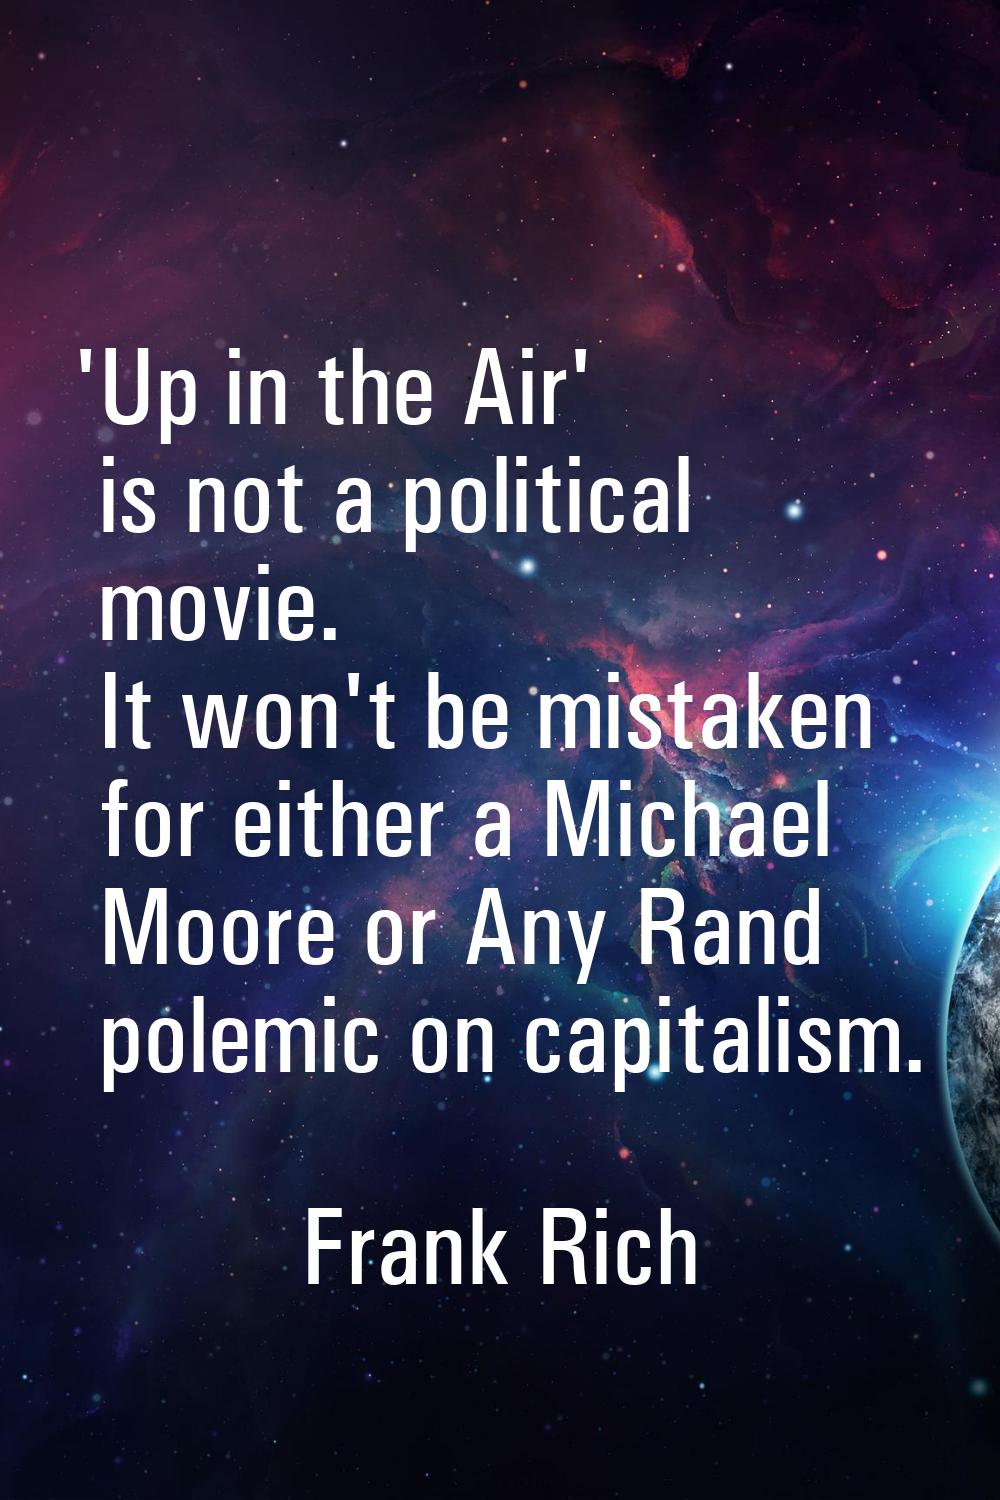 'Up in the Air' is not a political movie. It won't be mistaken for either a Michael Moore or Any Ra